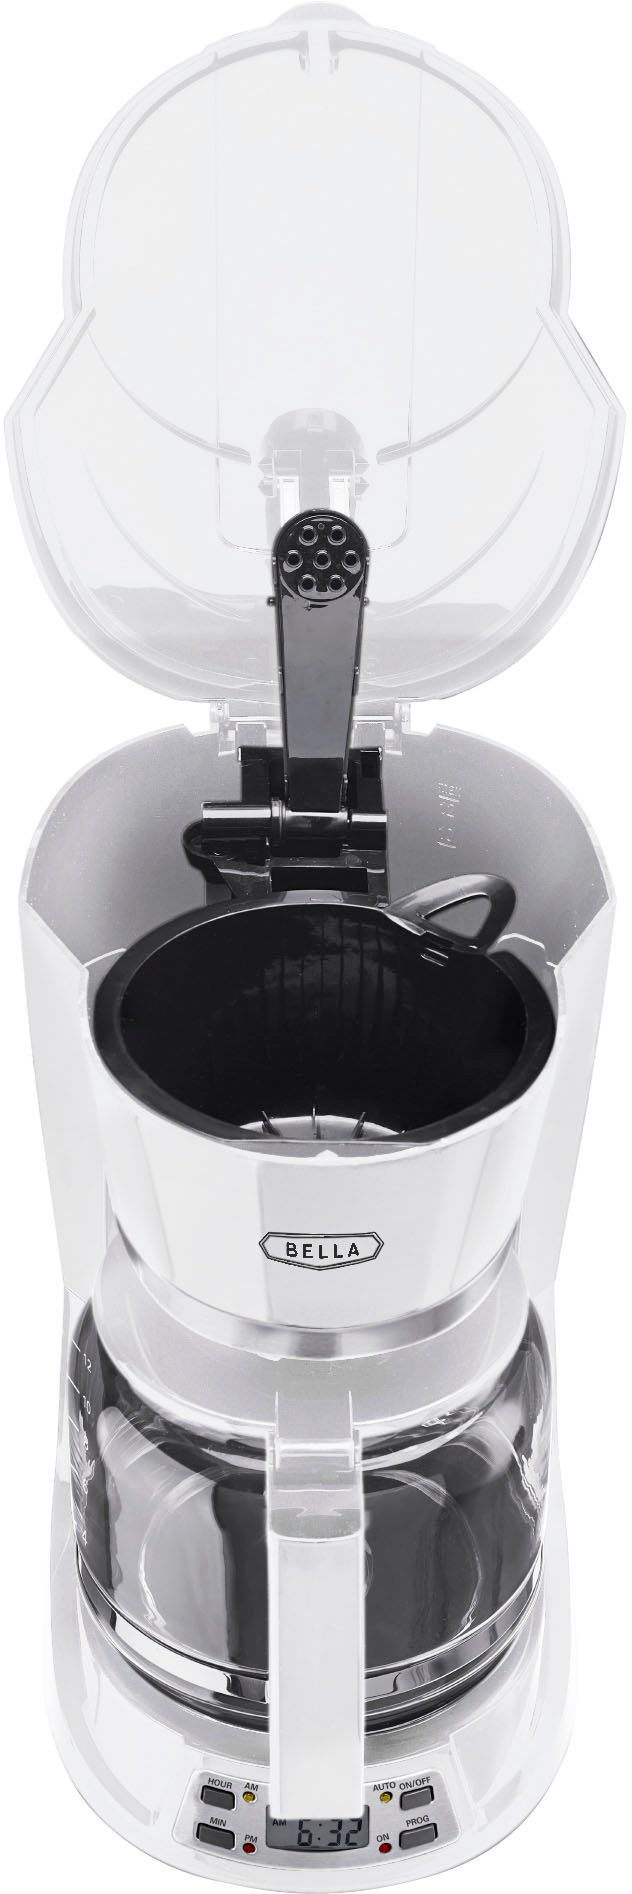 Angle View: Bella - 12-Cup Programmable Coffee Maker - White